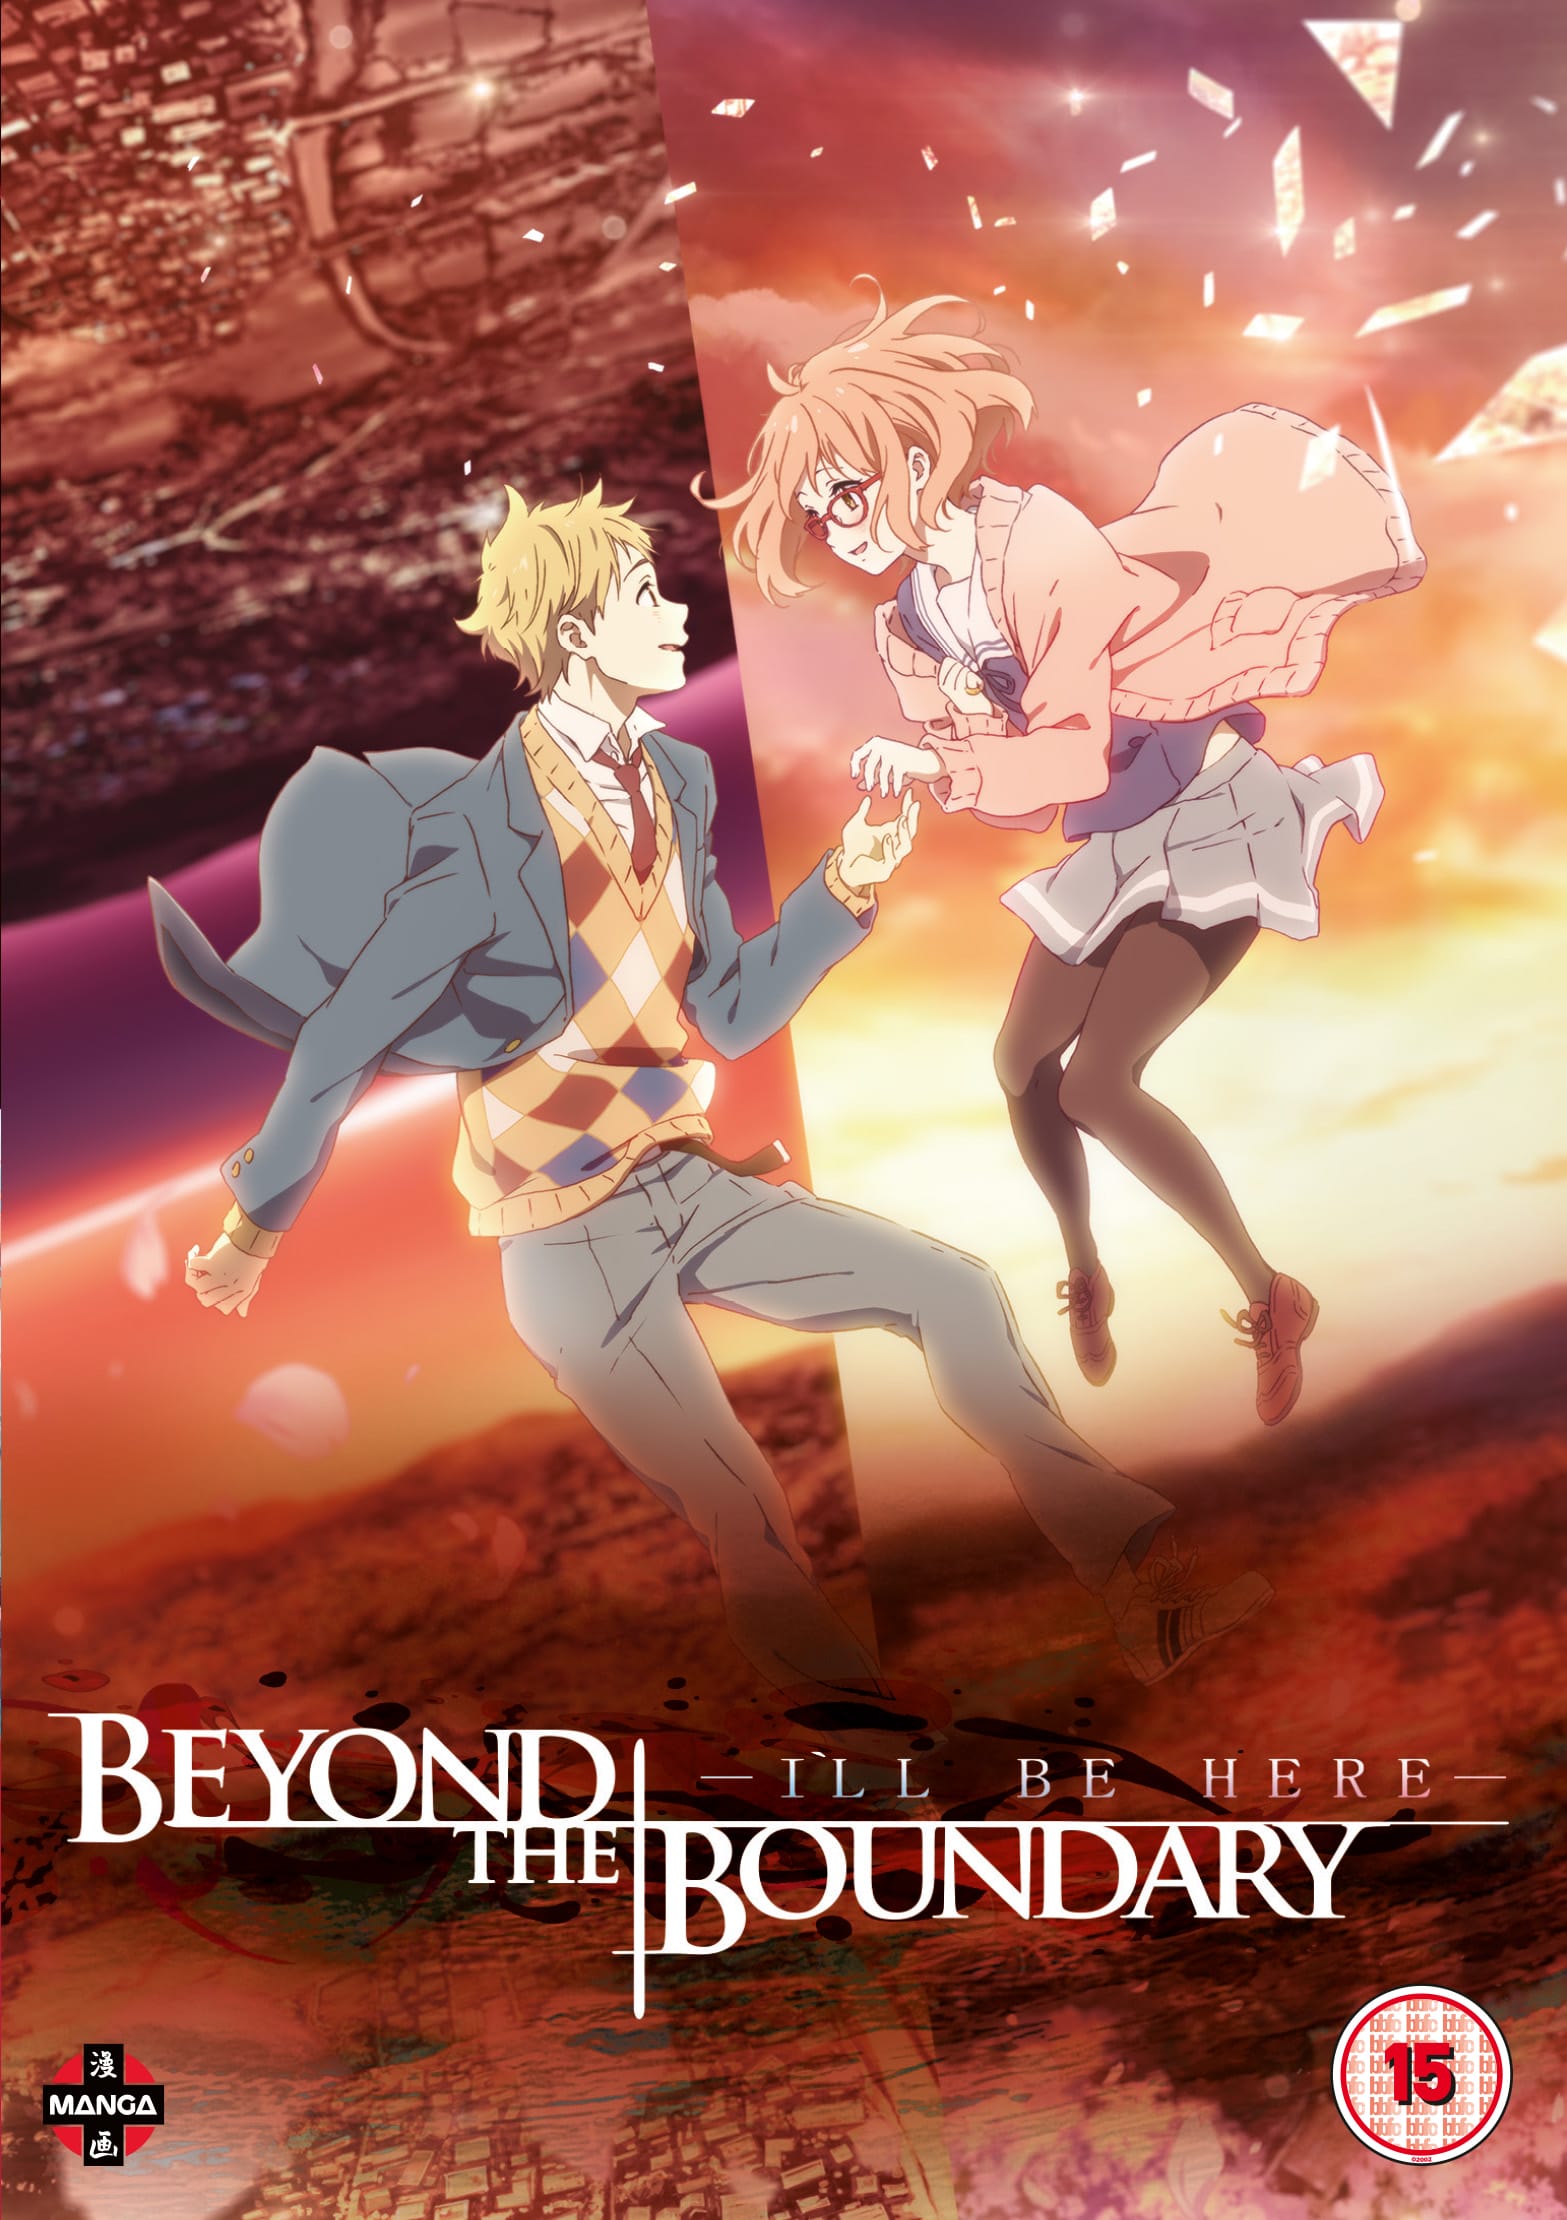 A dangerous urban fantasy: A review of Beyond the Boundary